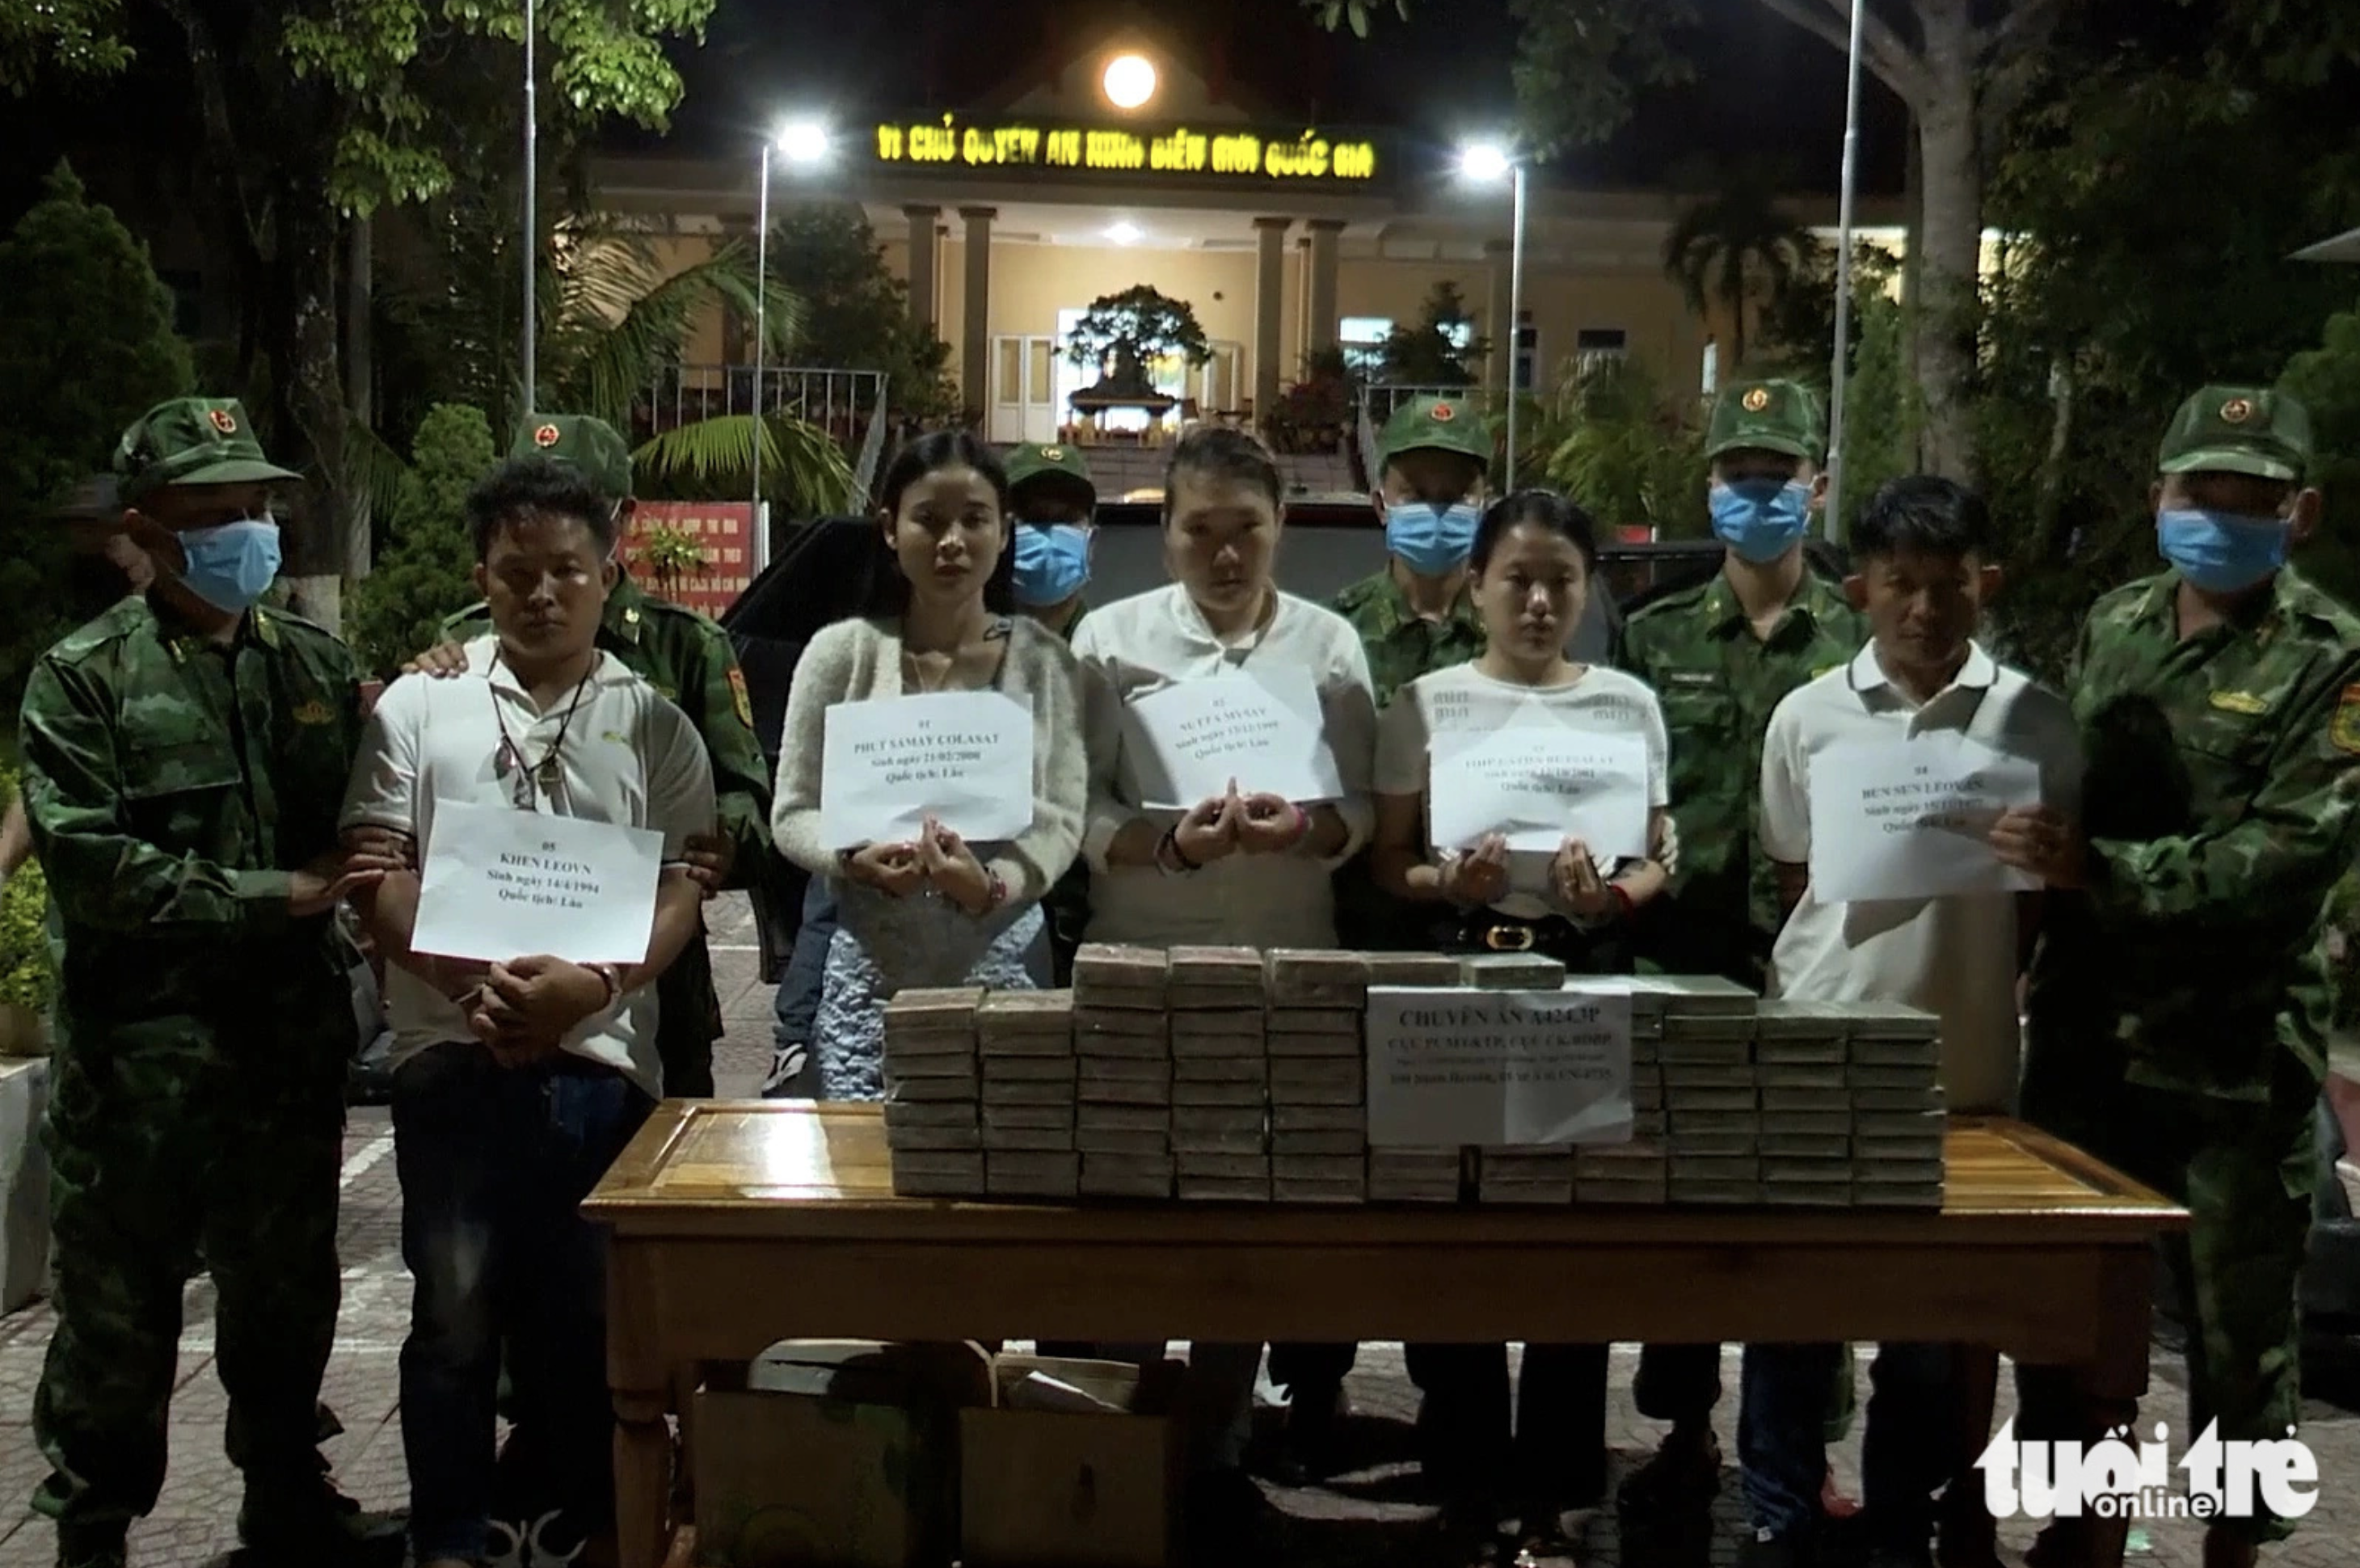 5 Laotians arrested for transporting 100 bricks of heroin into Vietnam